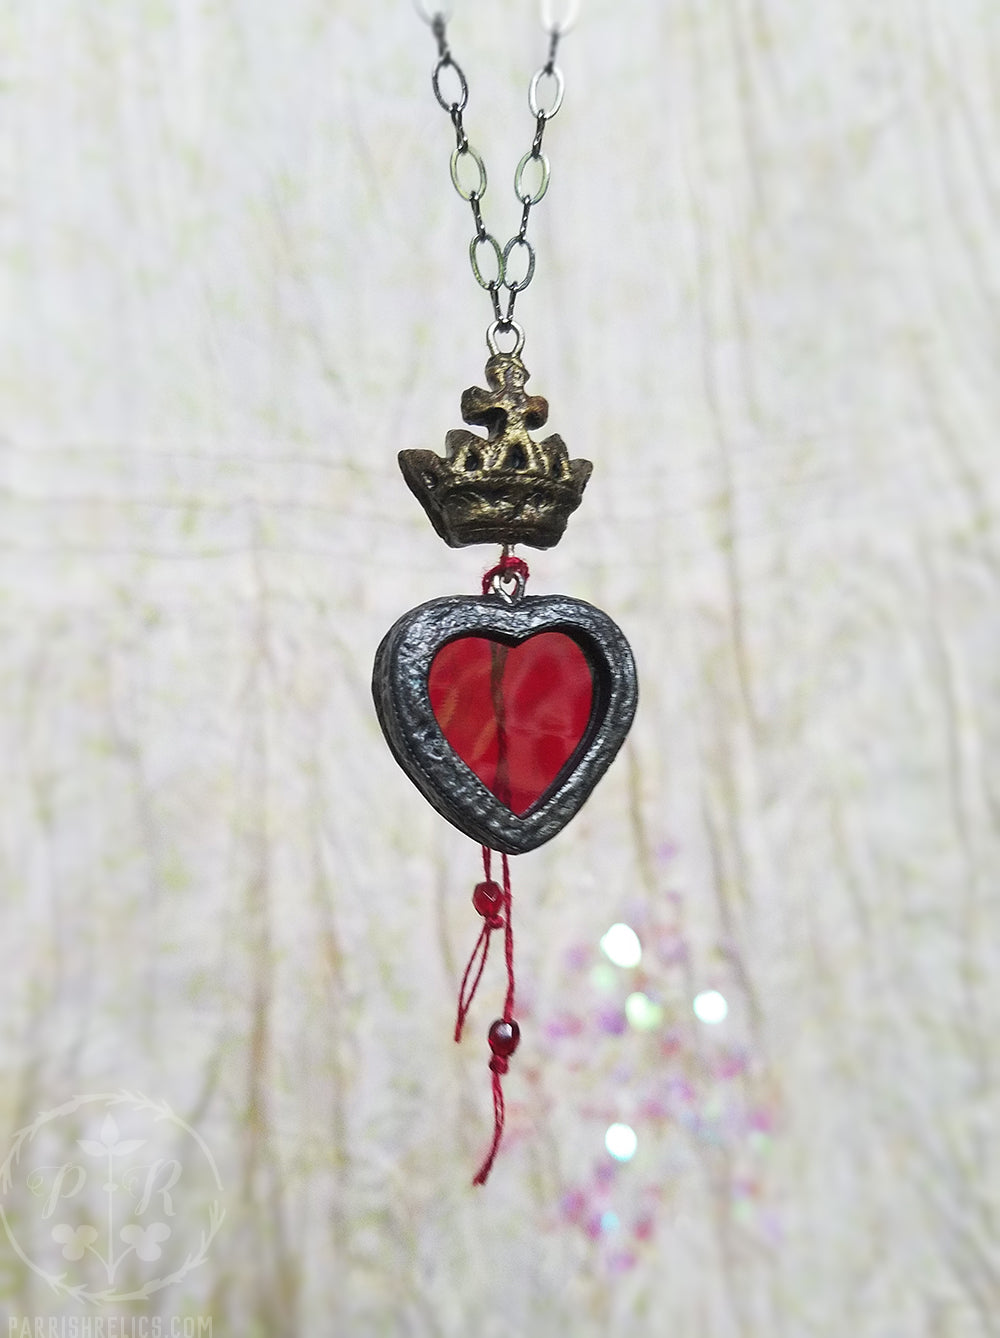 The Heart's Purpose ~ Crowned Stained Glass Amulet